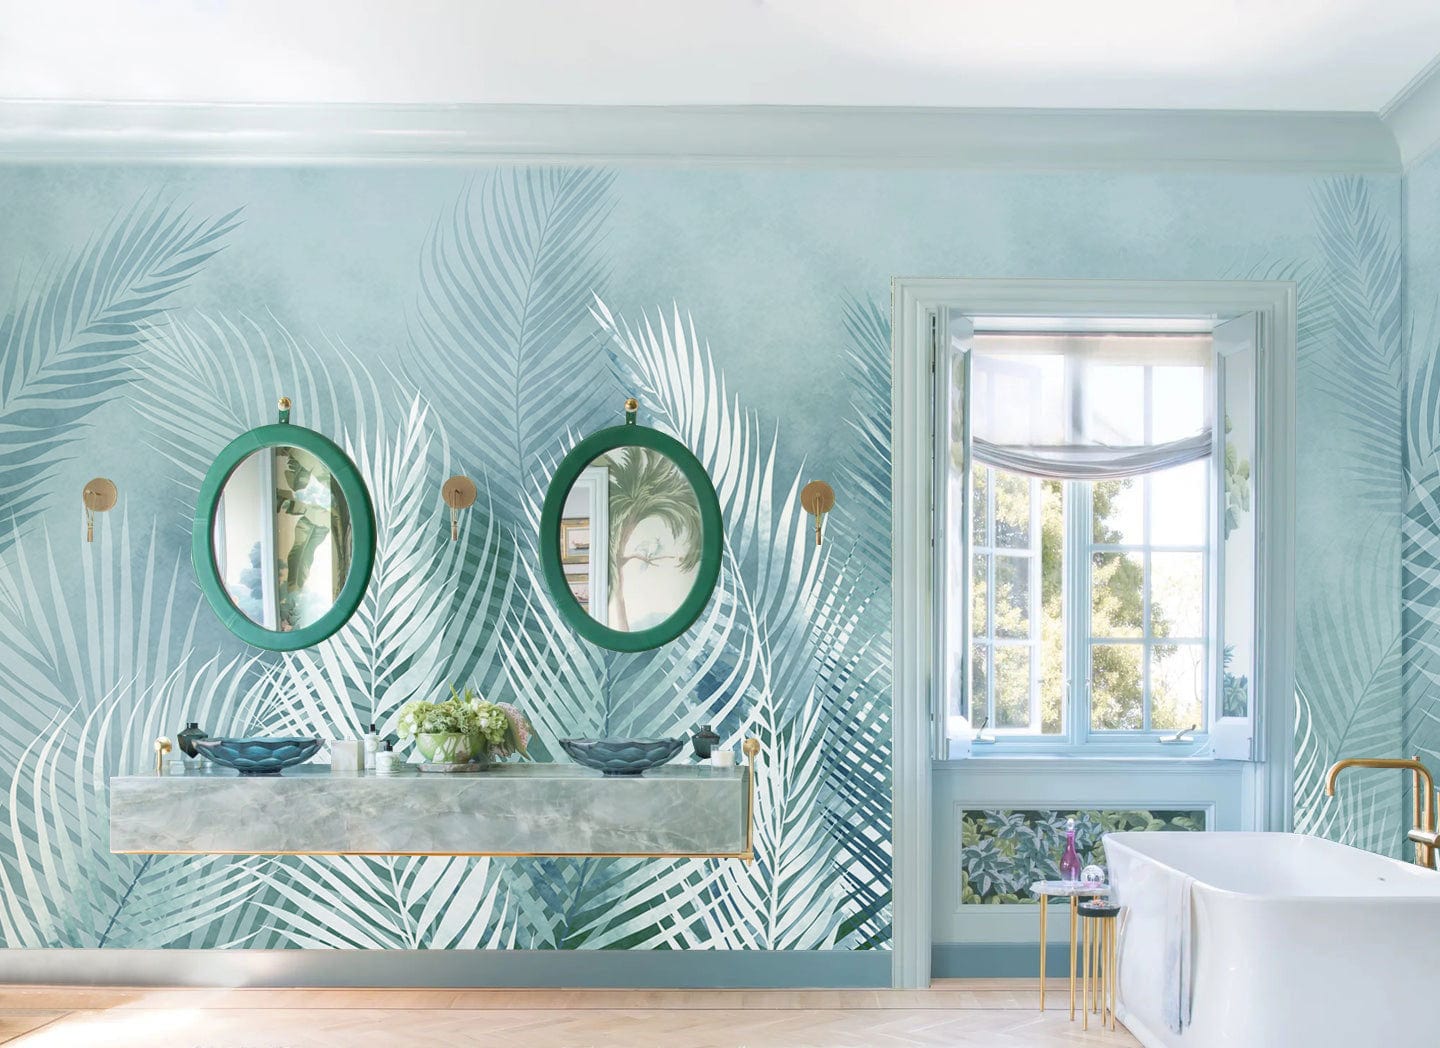 Wallpaper mural with feathers and leaves in turquoise for the bathroom's decor.